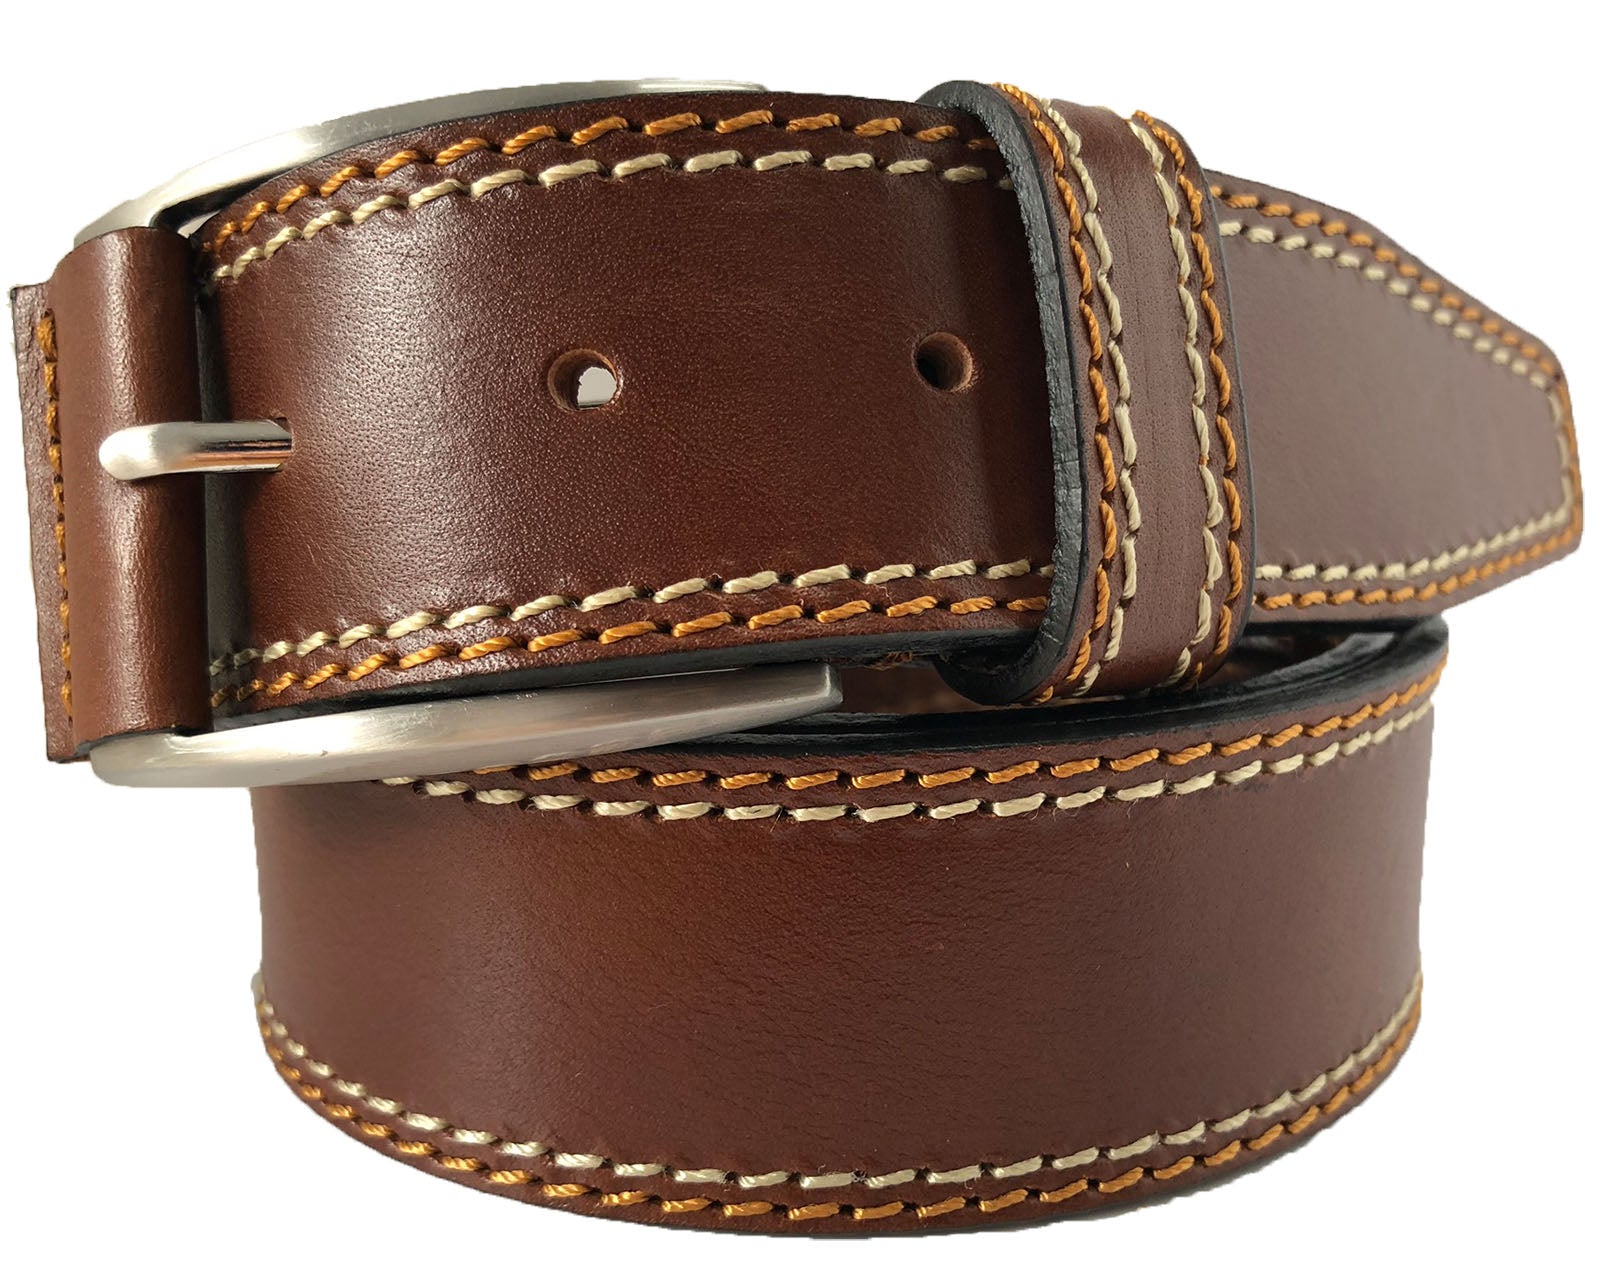 TAN 40MM CONTRAST DOUBLE STITCHED HIDE LEATHER BELT